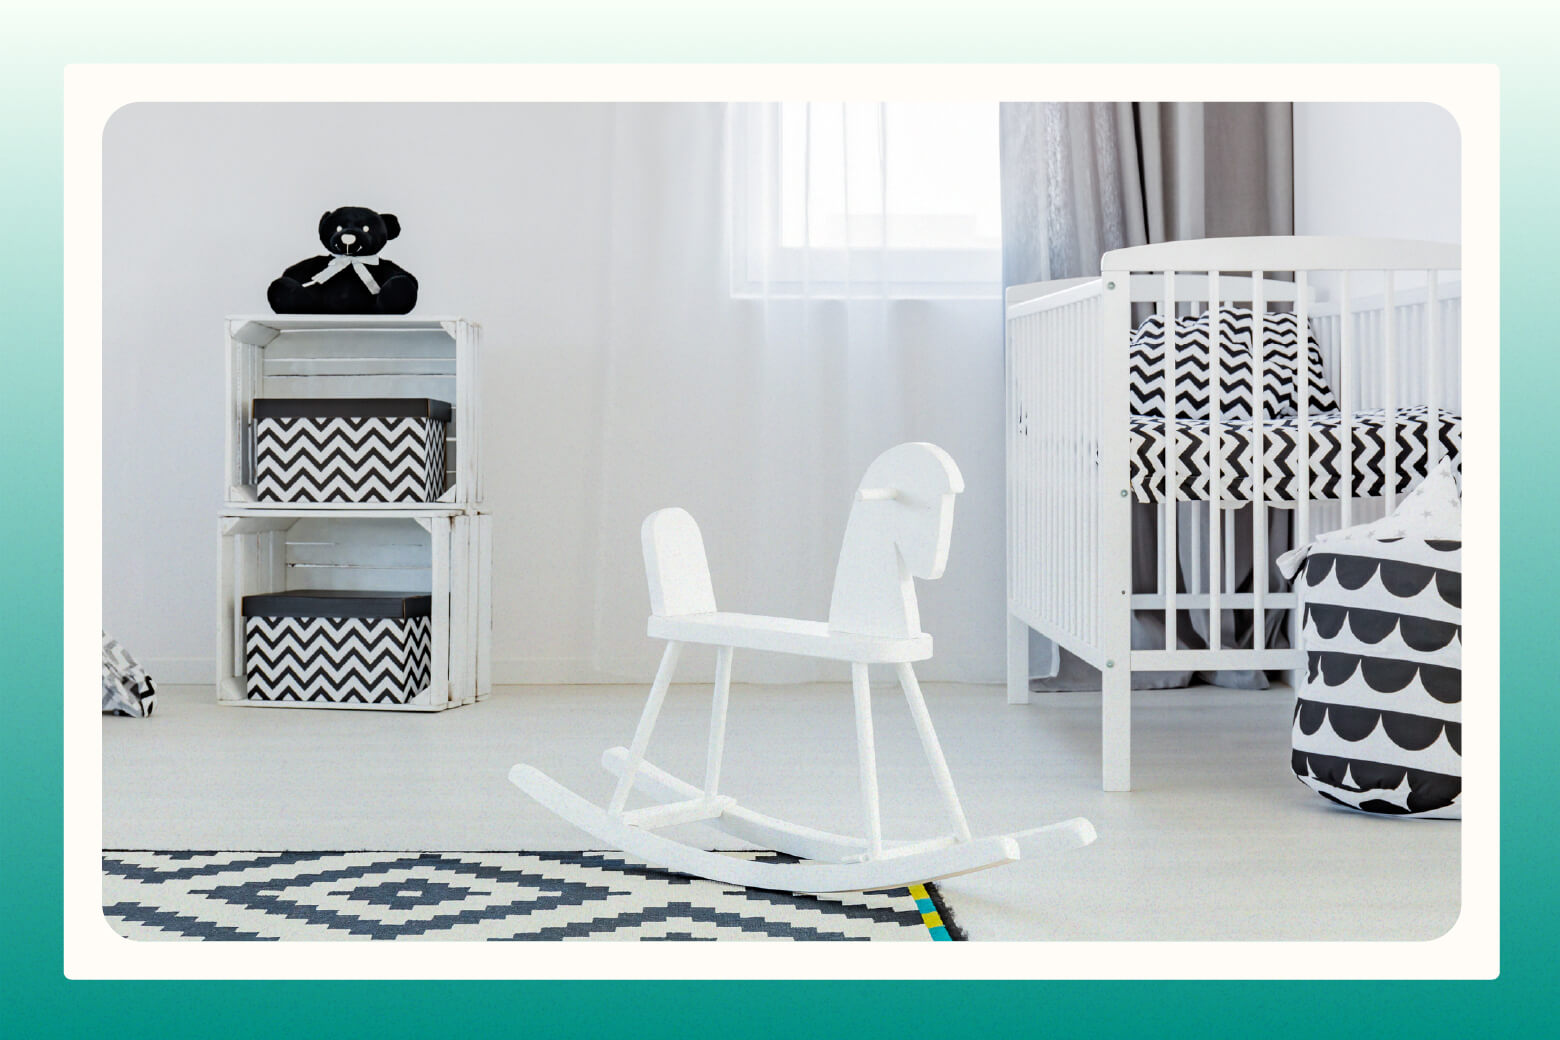 Baby's nursery with black and white decor